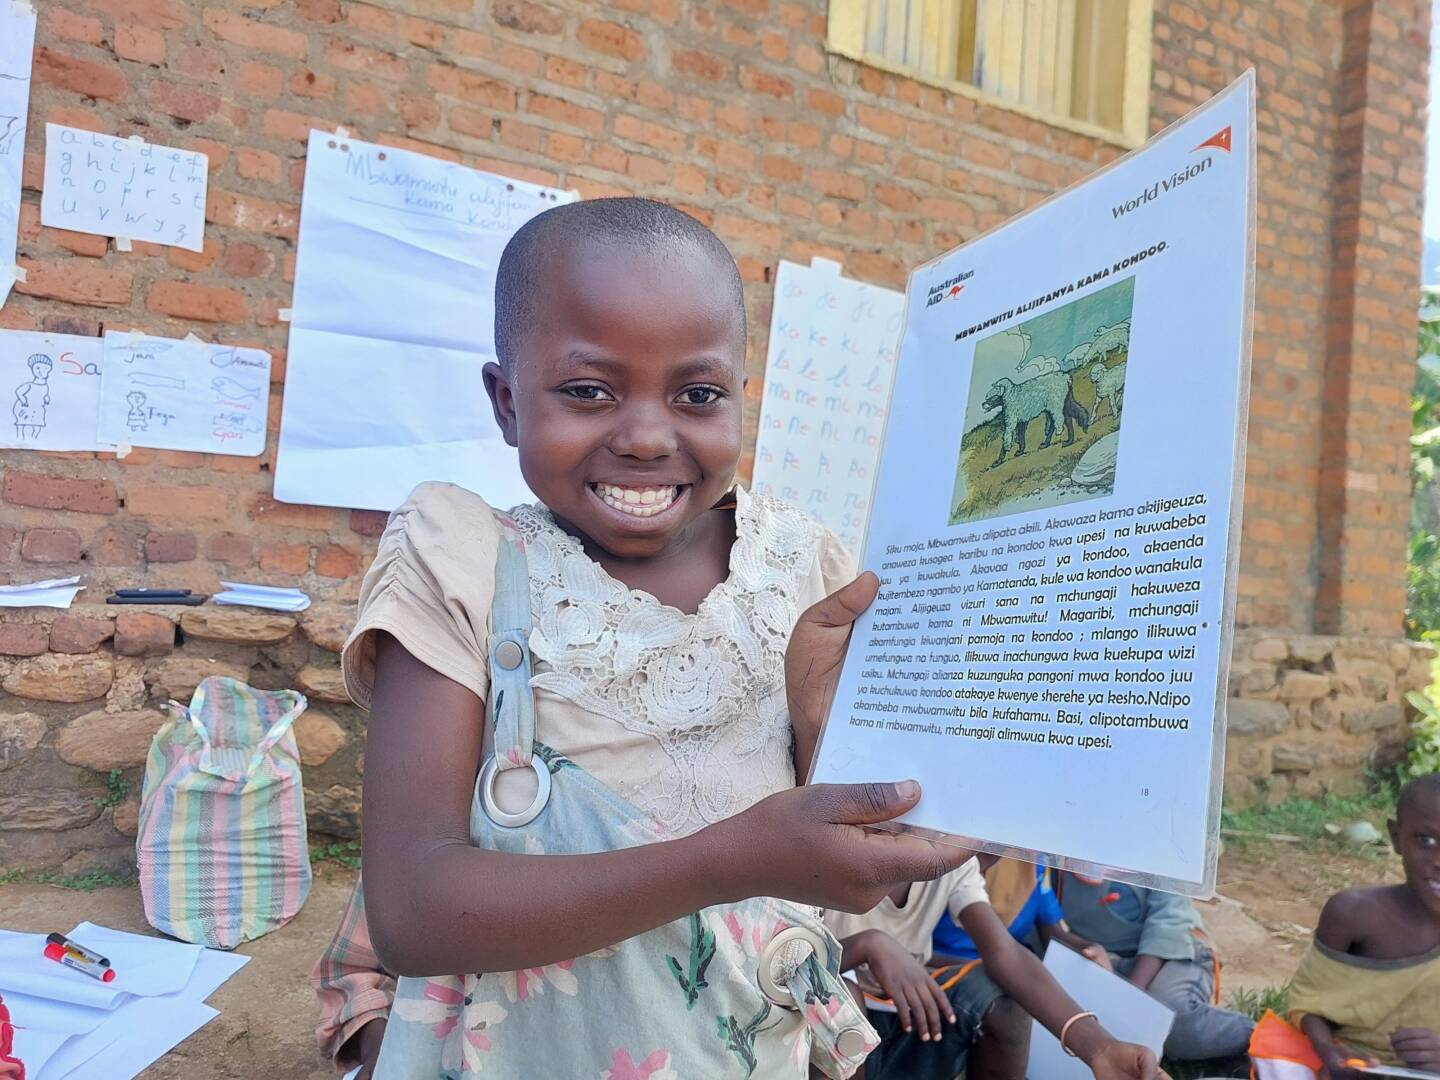 A girl with a big smile holds up a laminated paper.